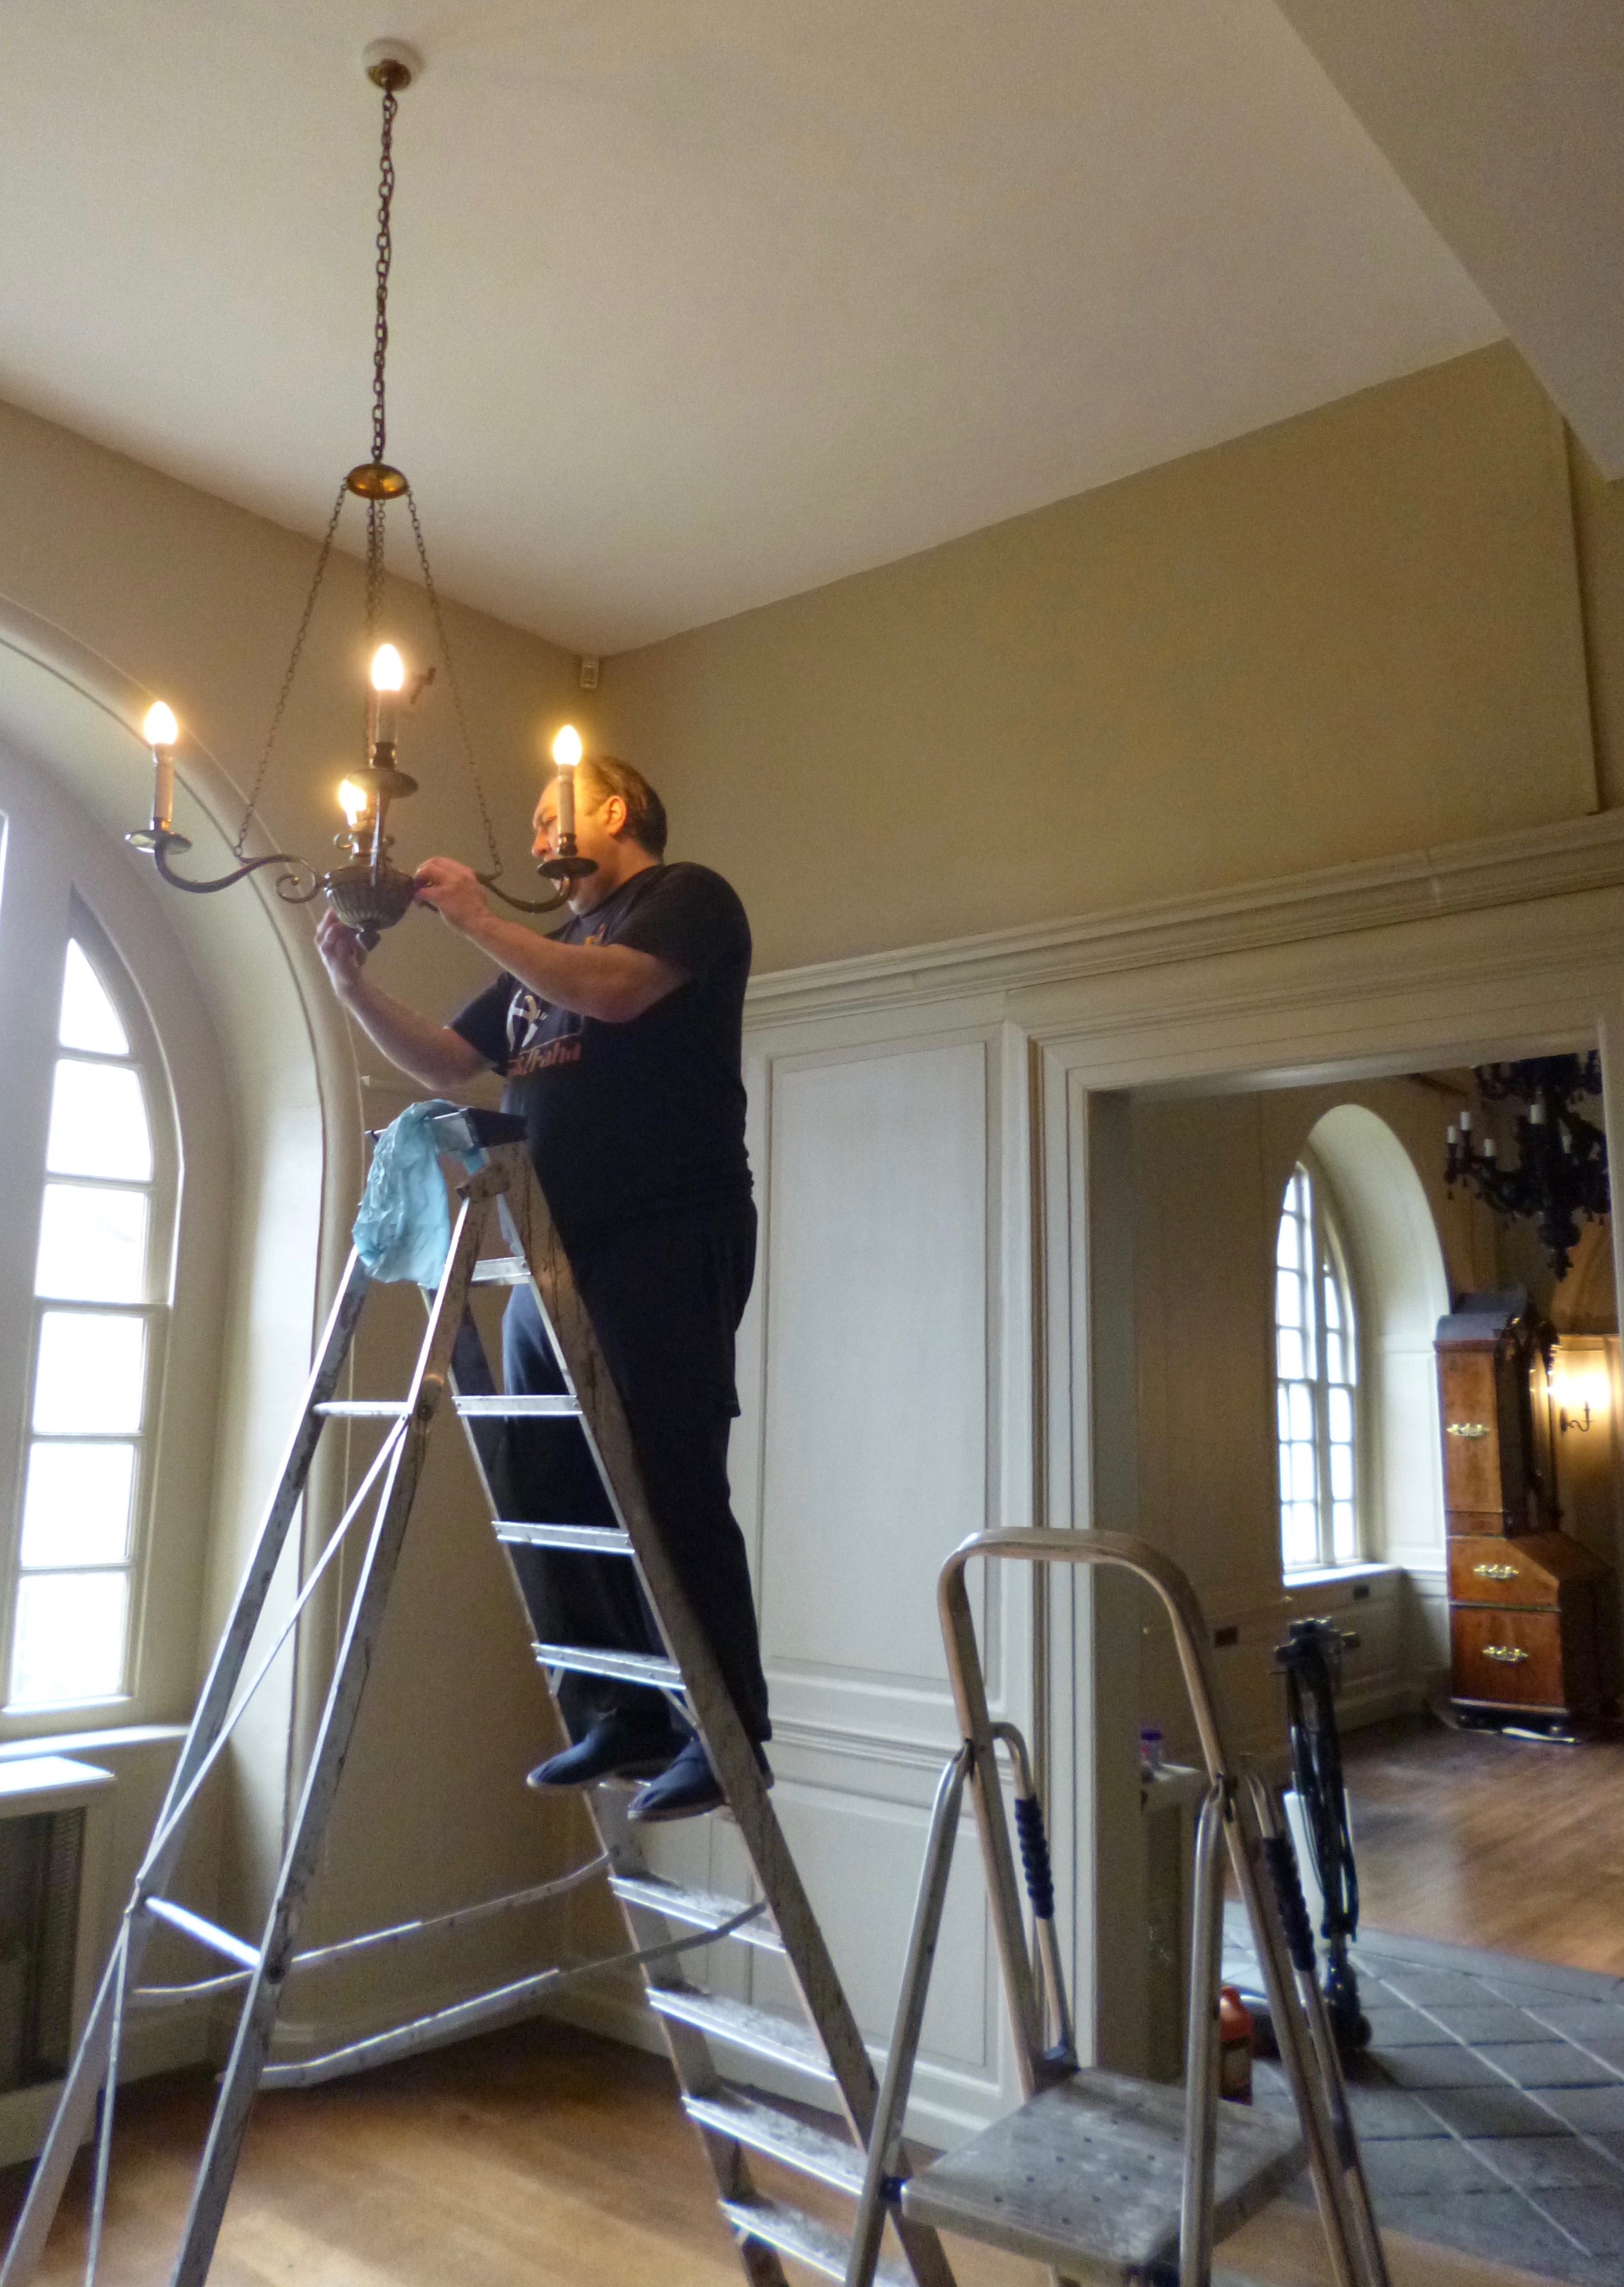 Chandeliers in the Reception Room being cleaned in time for the Red Lodge reopening.